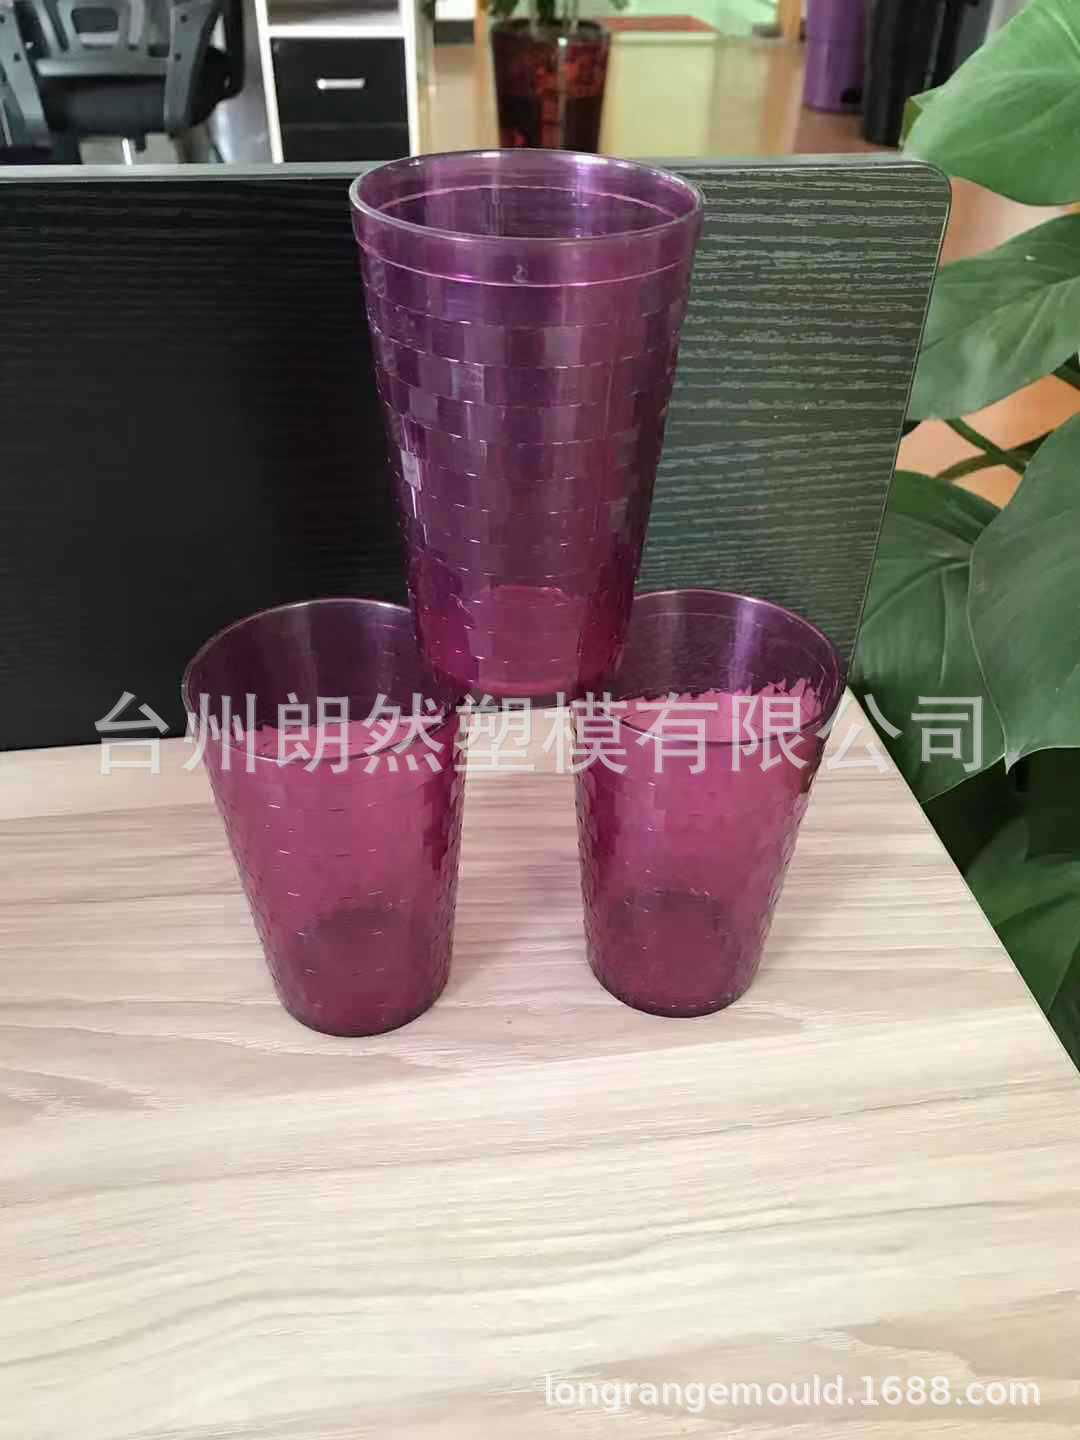 High quality large capacity food grade plastic crystal cup mold is designed by i 2